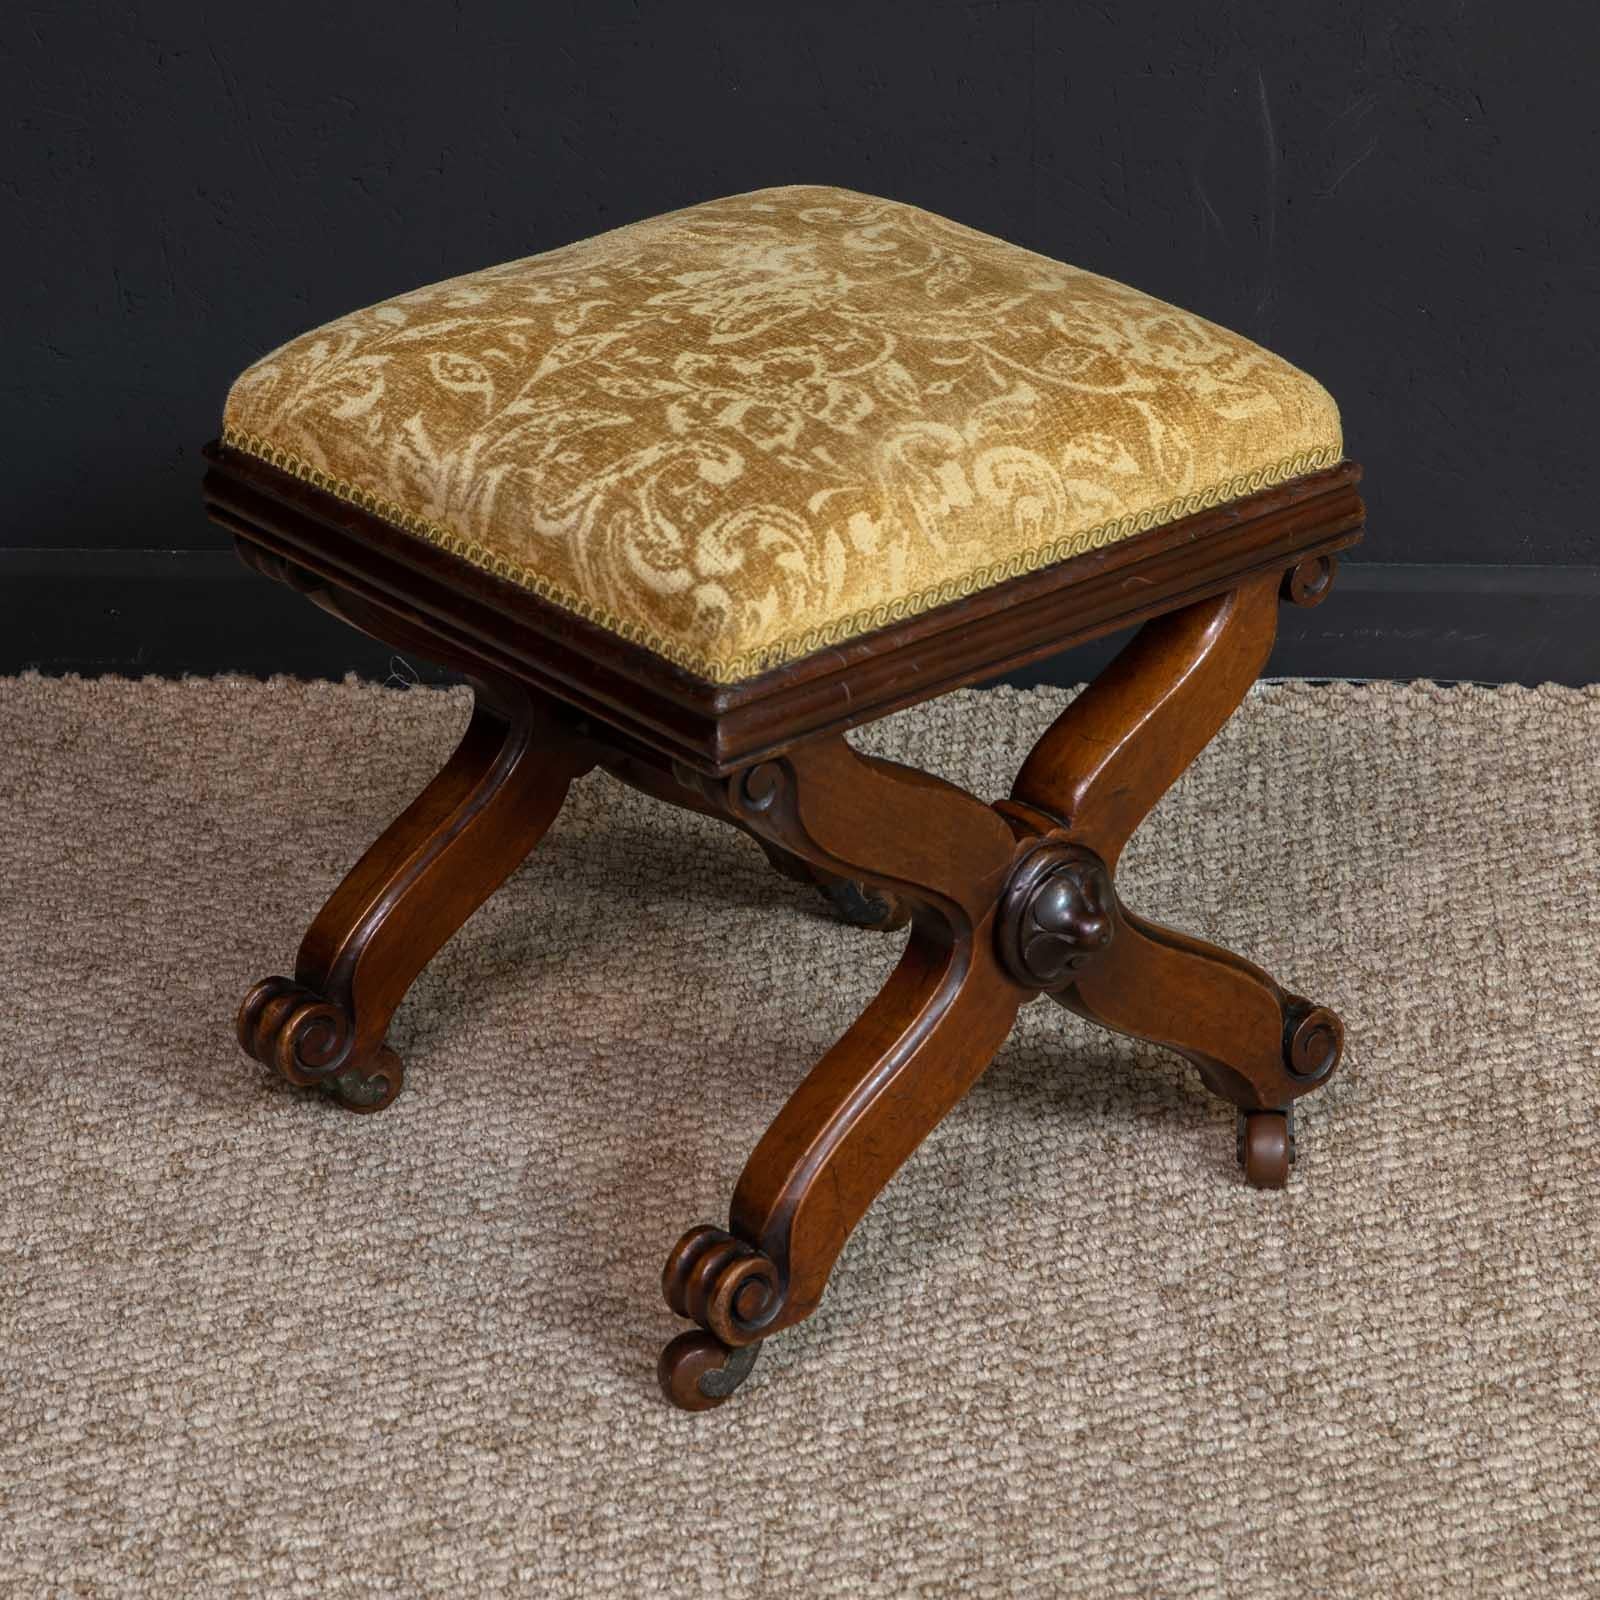 A William IV mahogany X framed stool of small proportions. One or two interesting features like the scroll feet and central carved bosses make it a cut above average. Very solid and sturdy with the gold patterned draylon being in very good